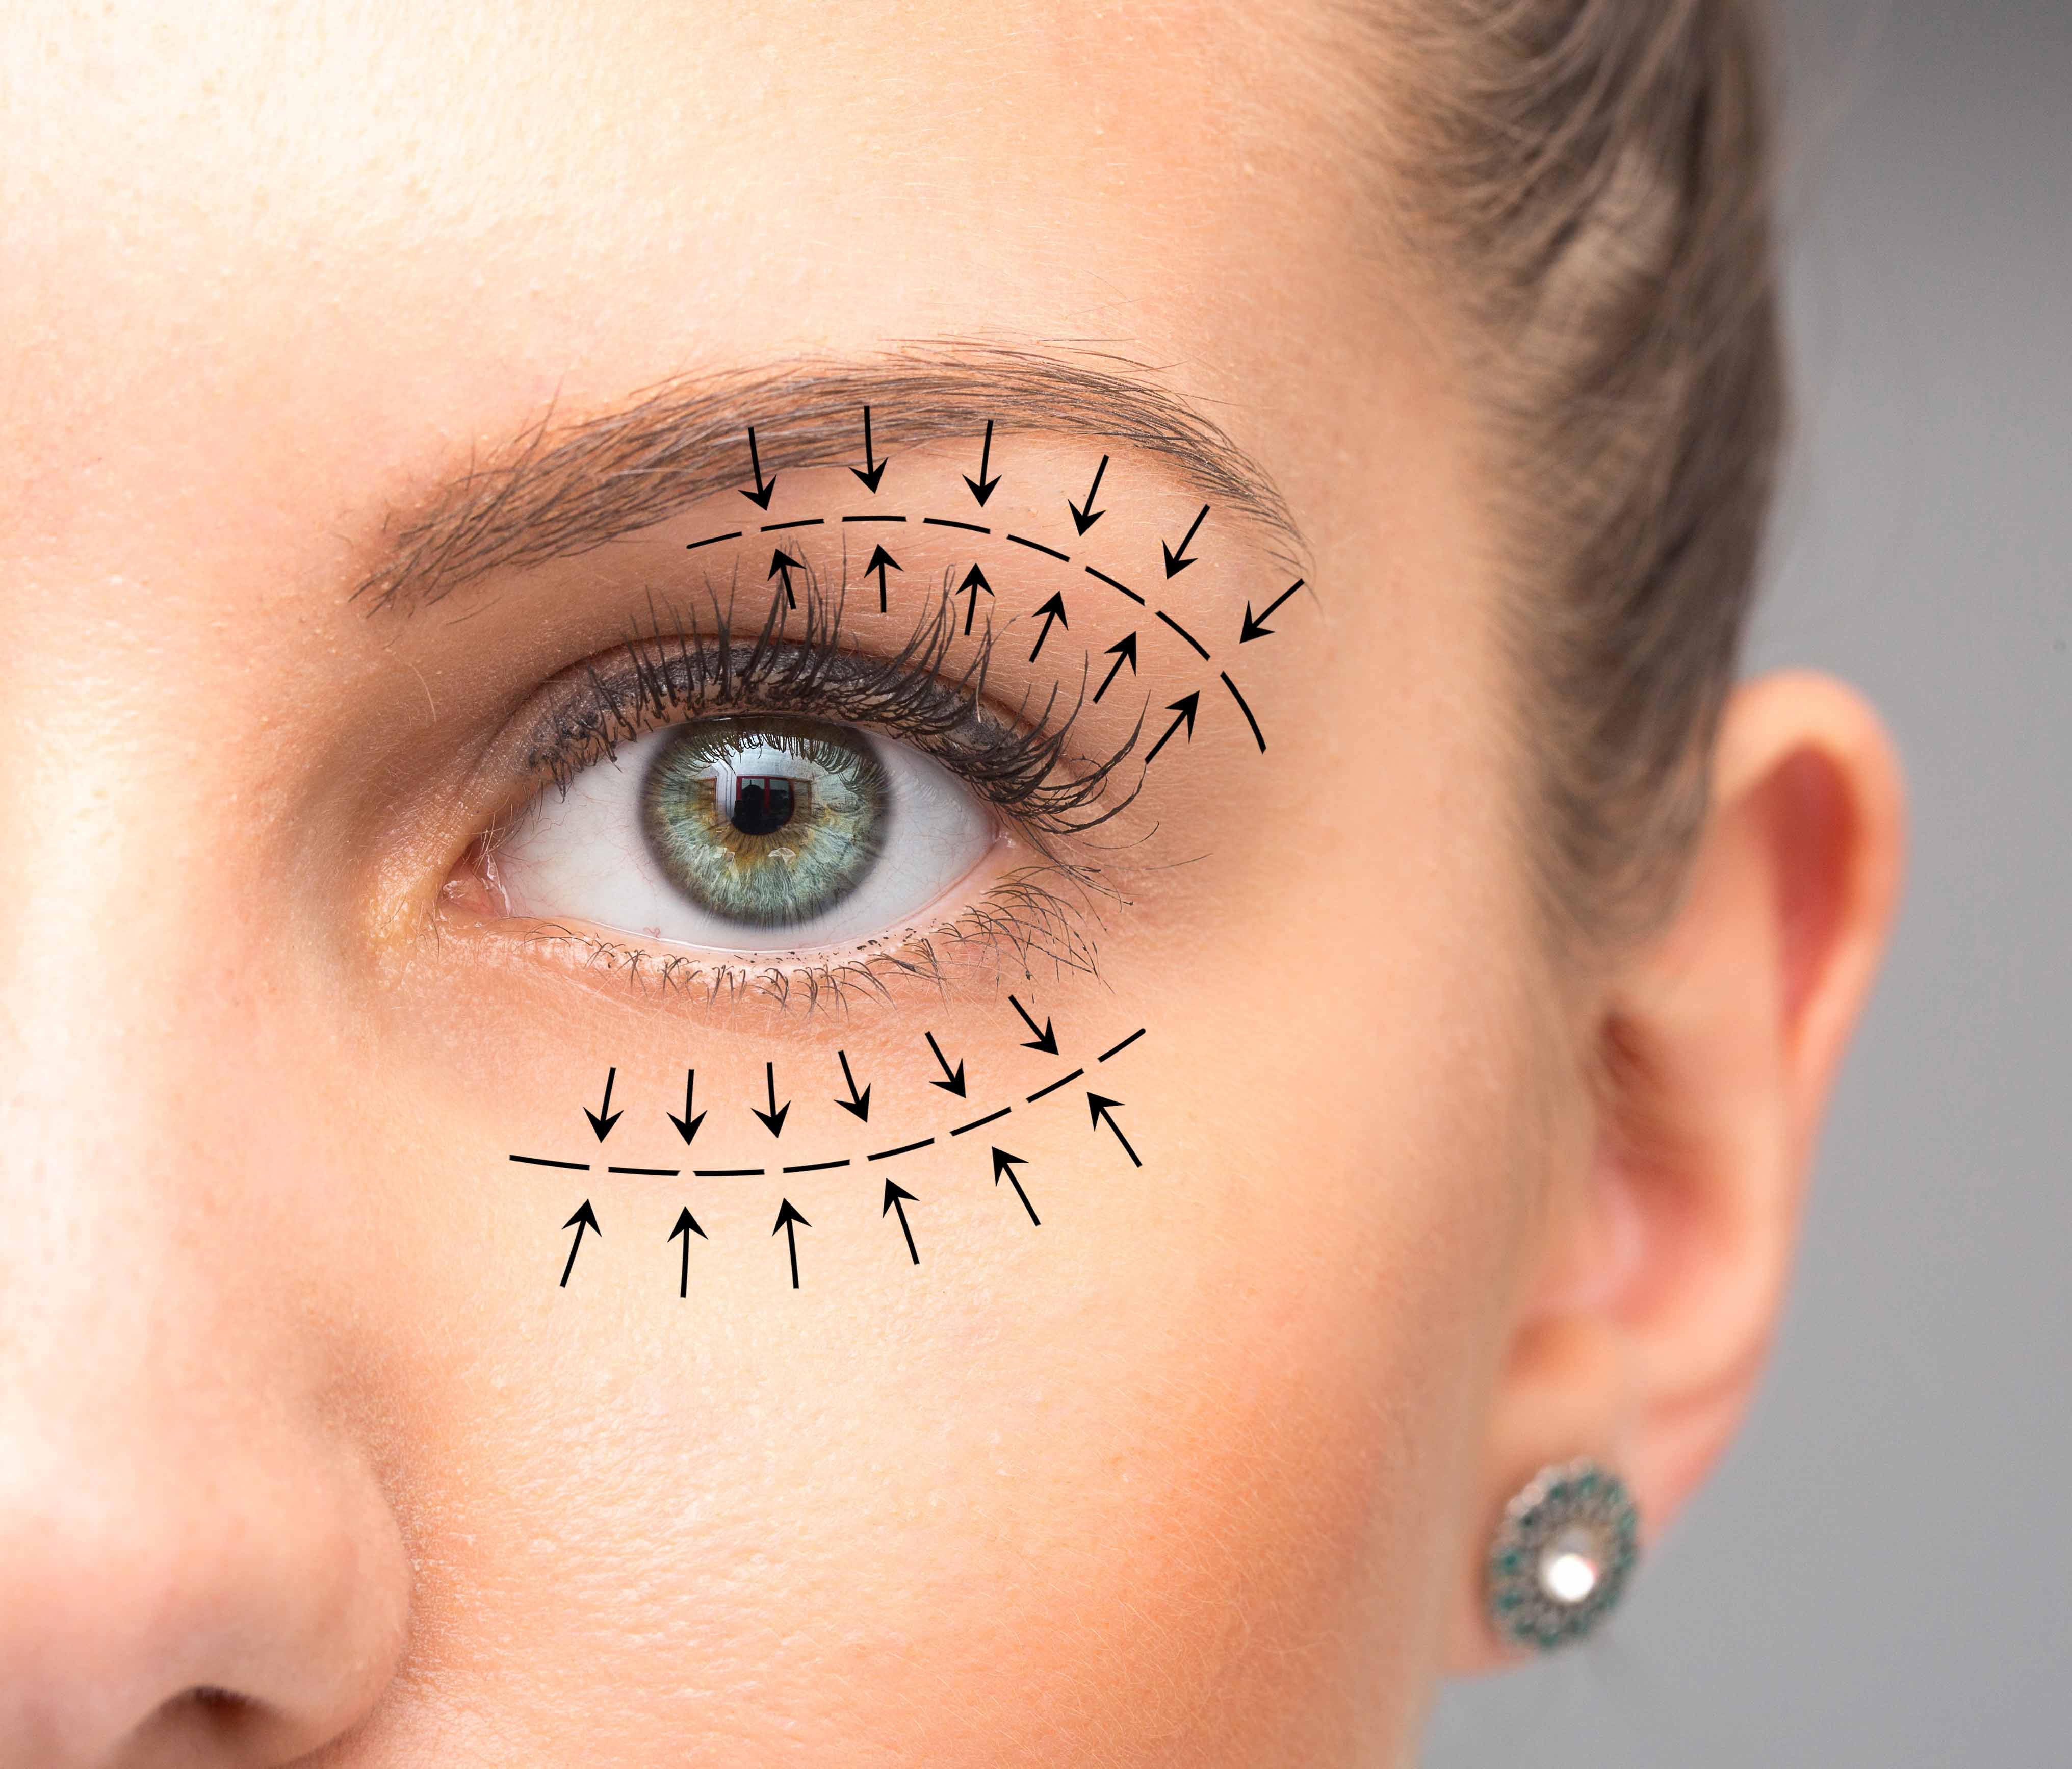 Top 10 Blepharoplasty Facts to Know Before Going under the Knife